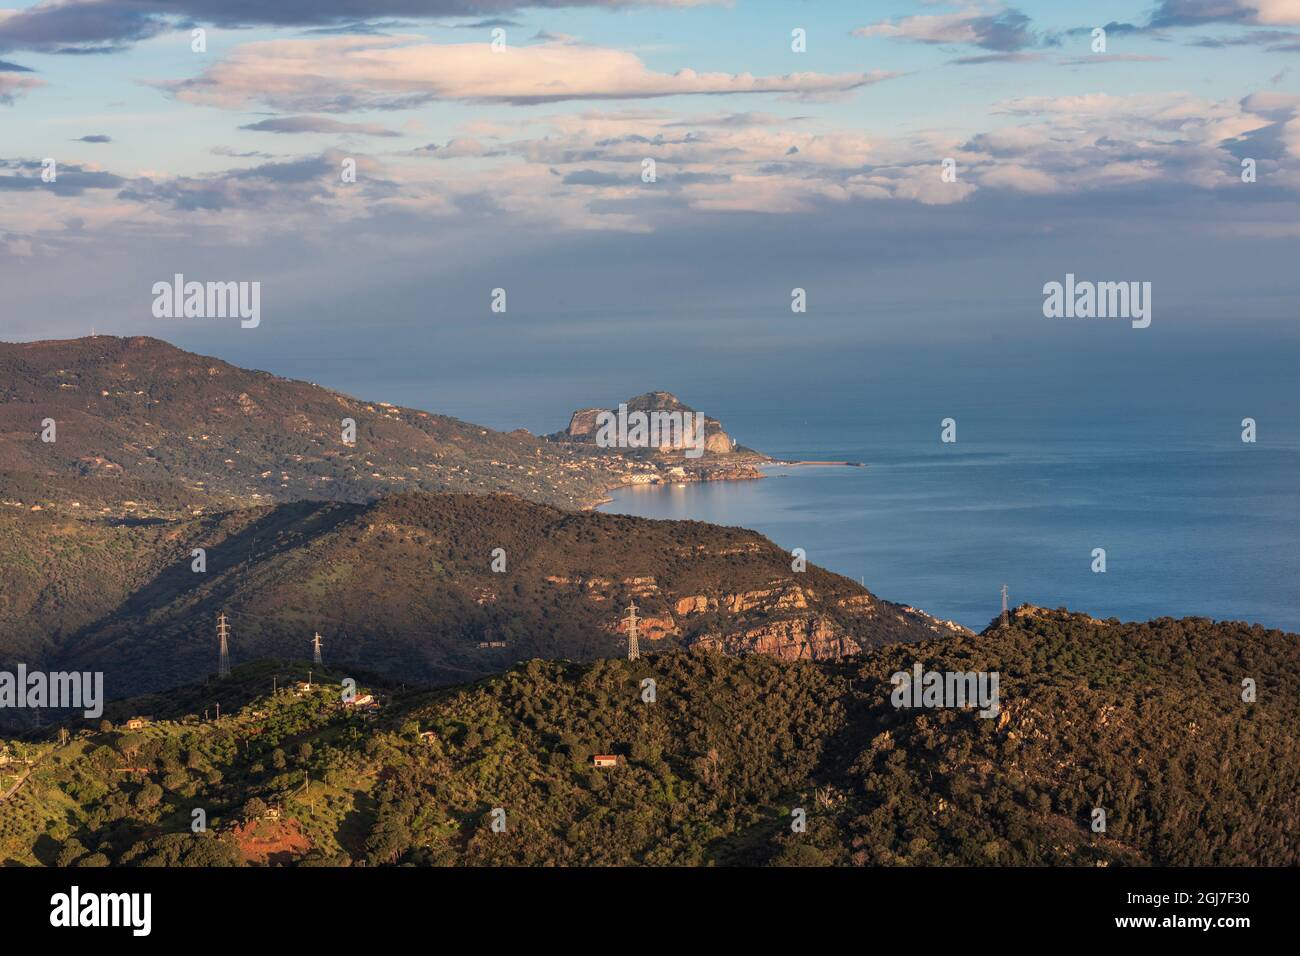 Italy, Sicily, Palermo, Pollina. Late afternoon view of the Sicilian coast from Pollina. Stock Photo